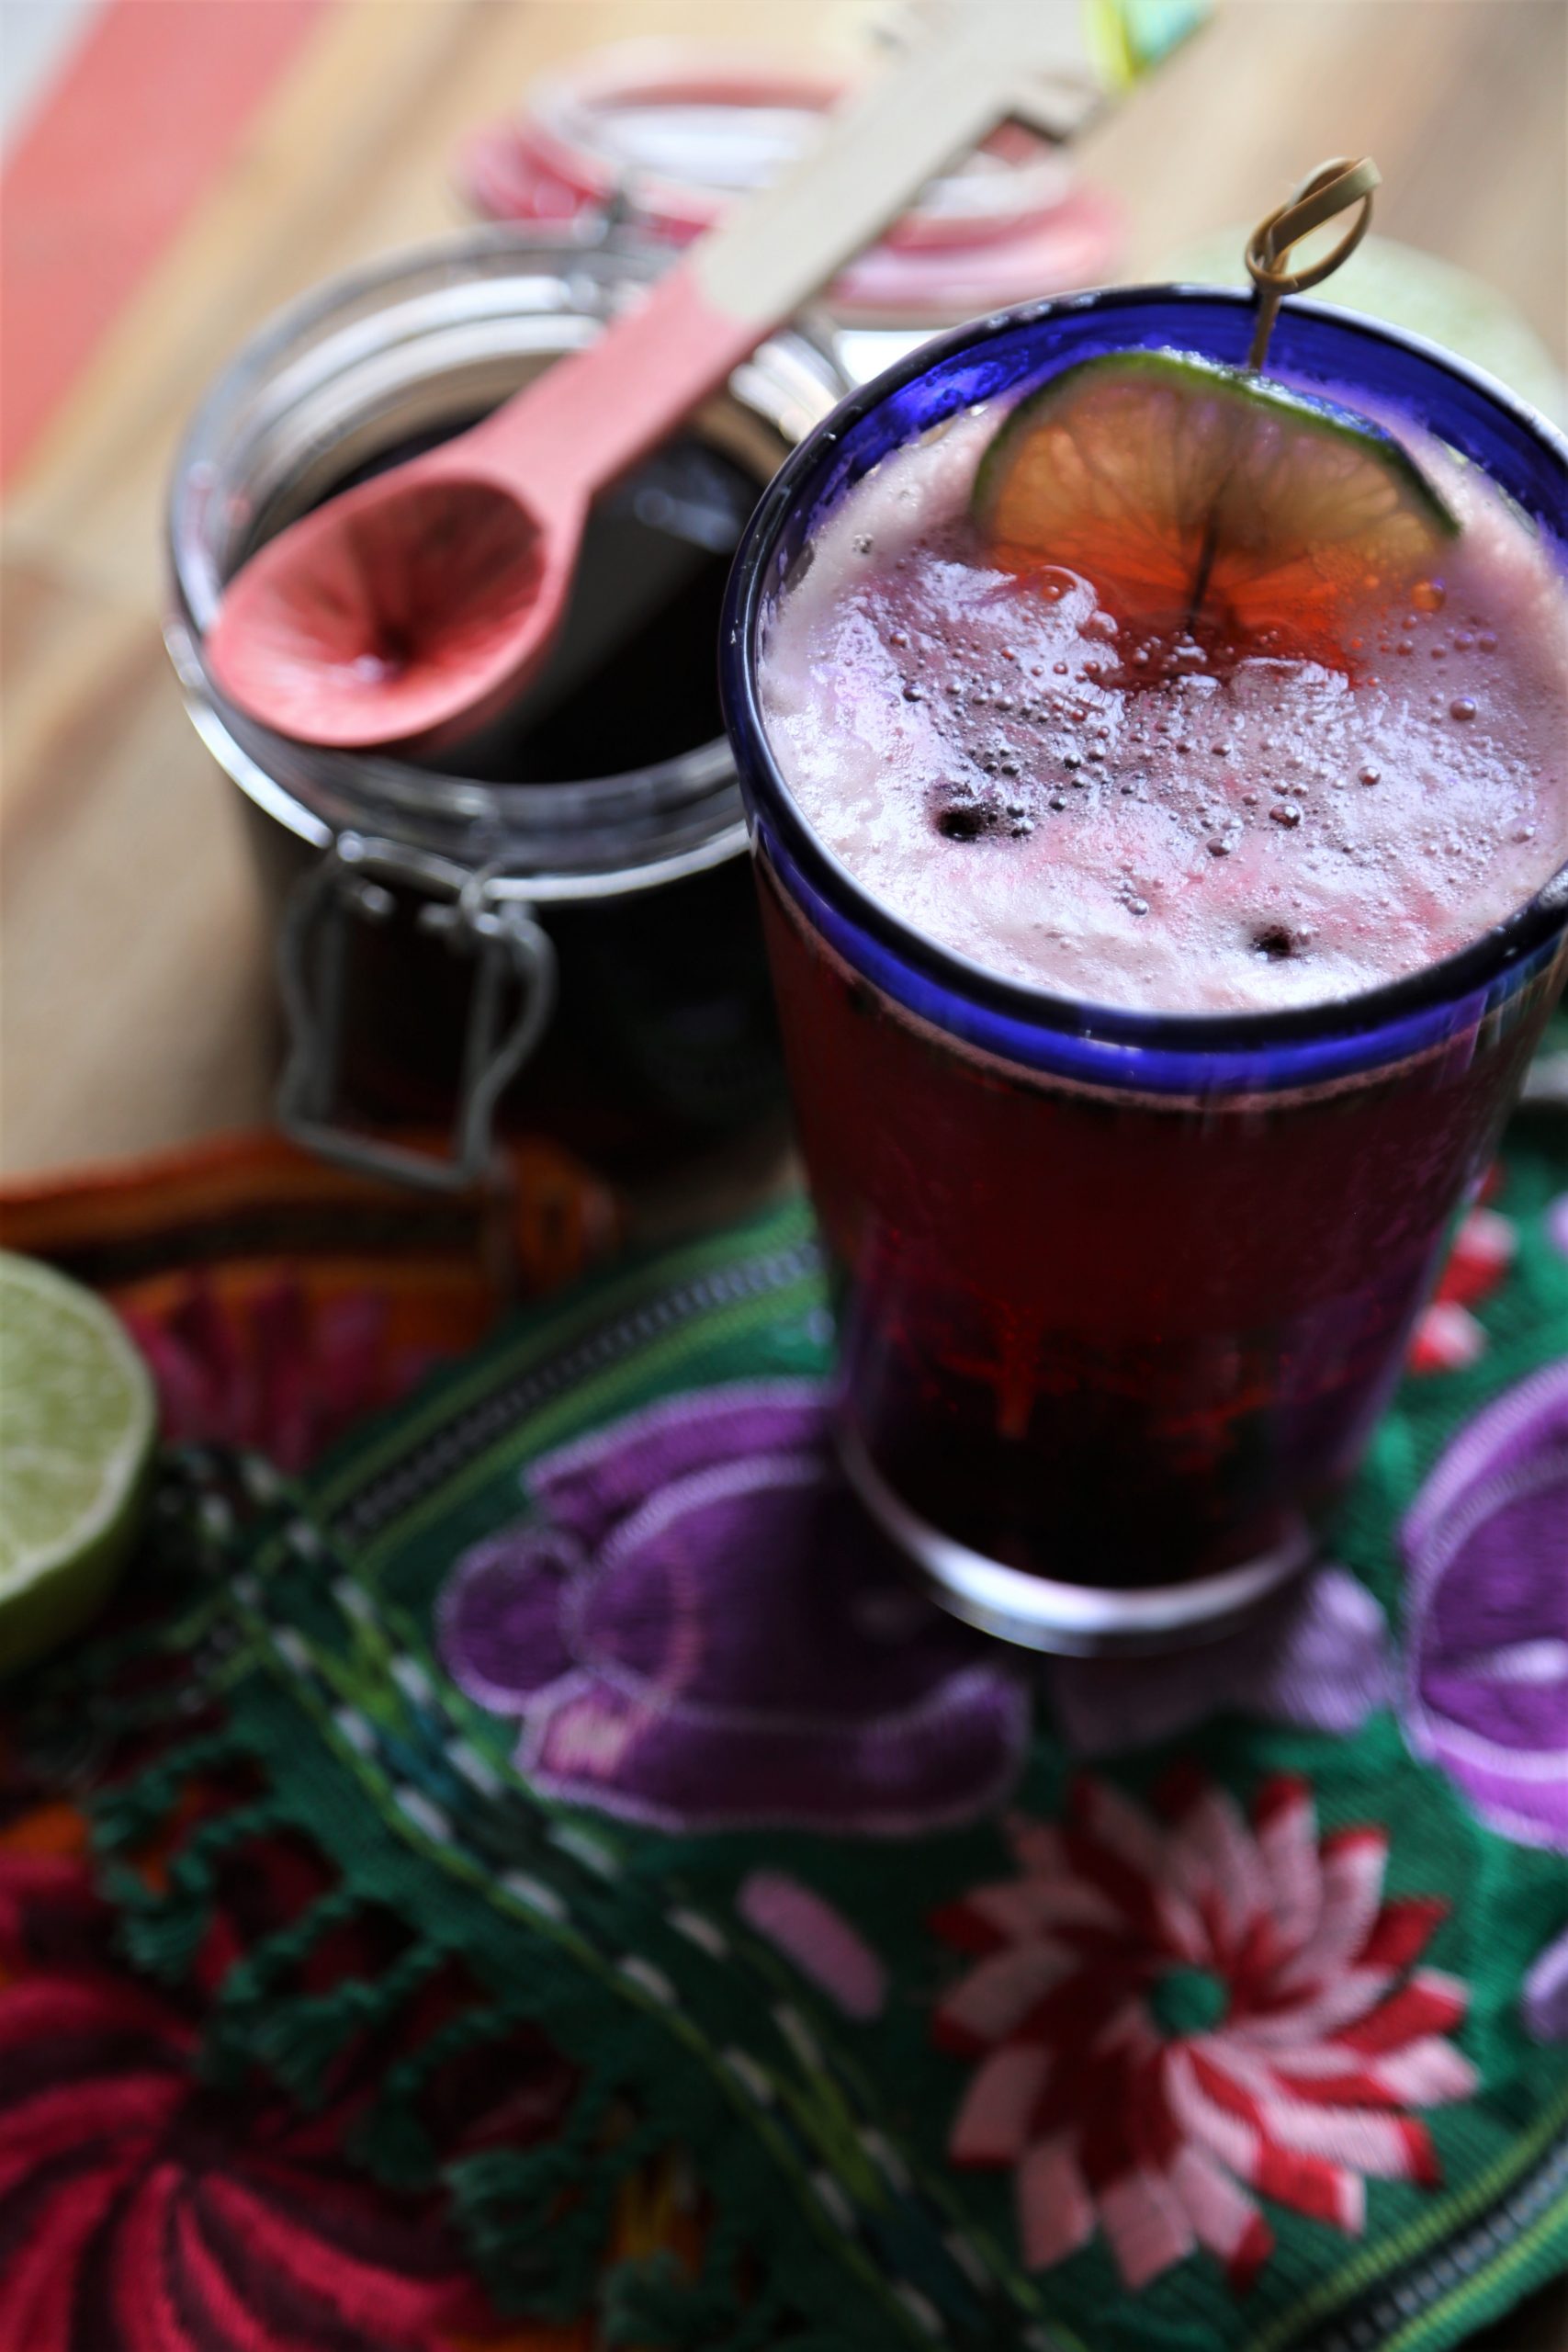 HOW TO MAKE HIBISCUS BEER